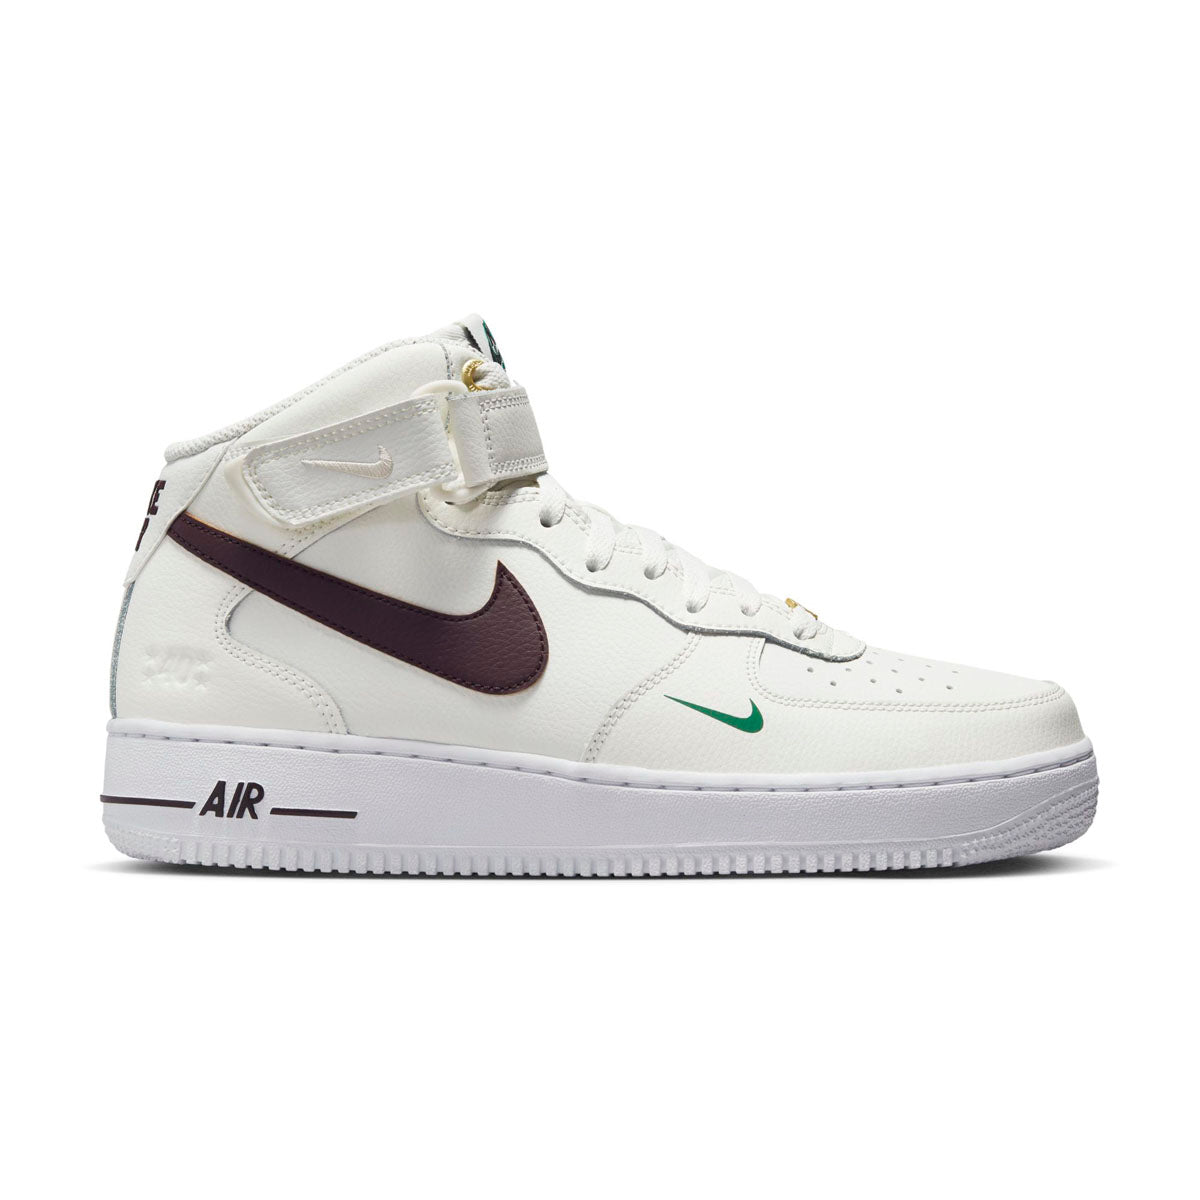 Nike Air Force 1 Mid '07 LV8 Men's Shoes.